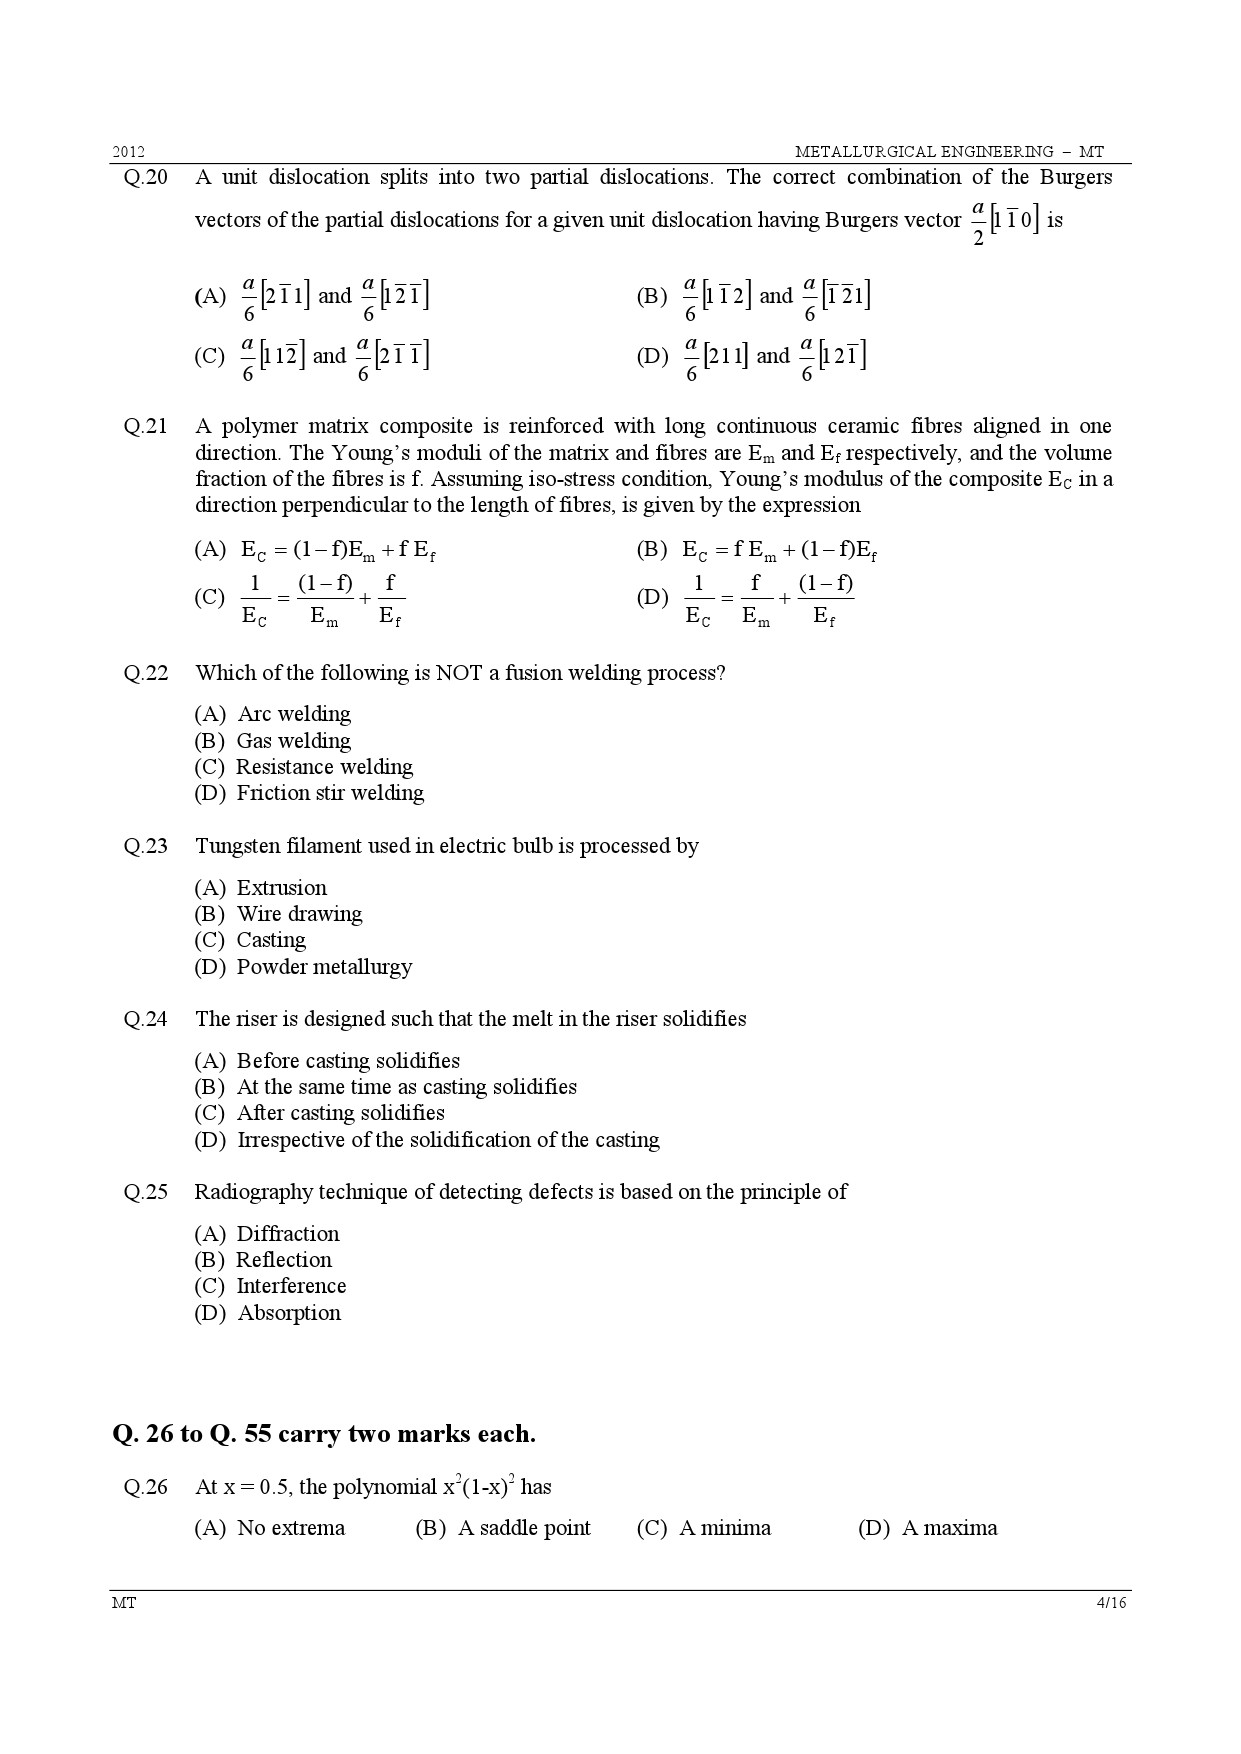 GATE Exam Question Paper 2012 Metallurgical Engineering 4